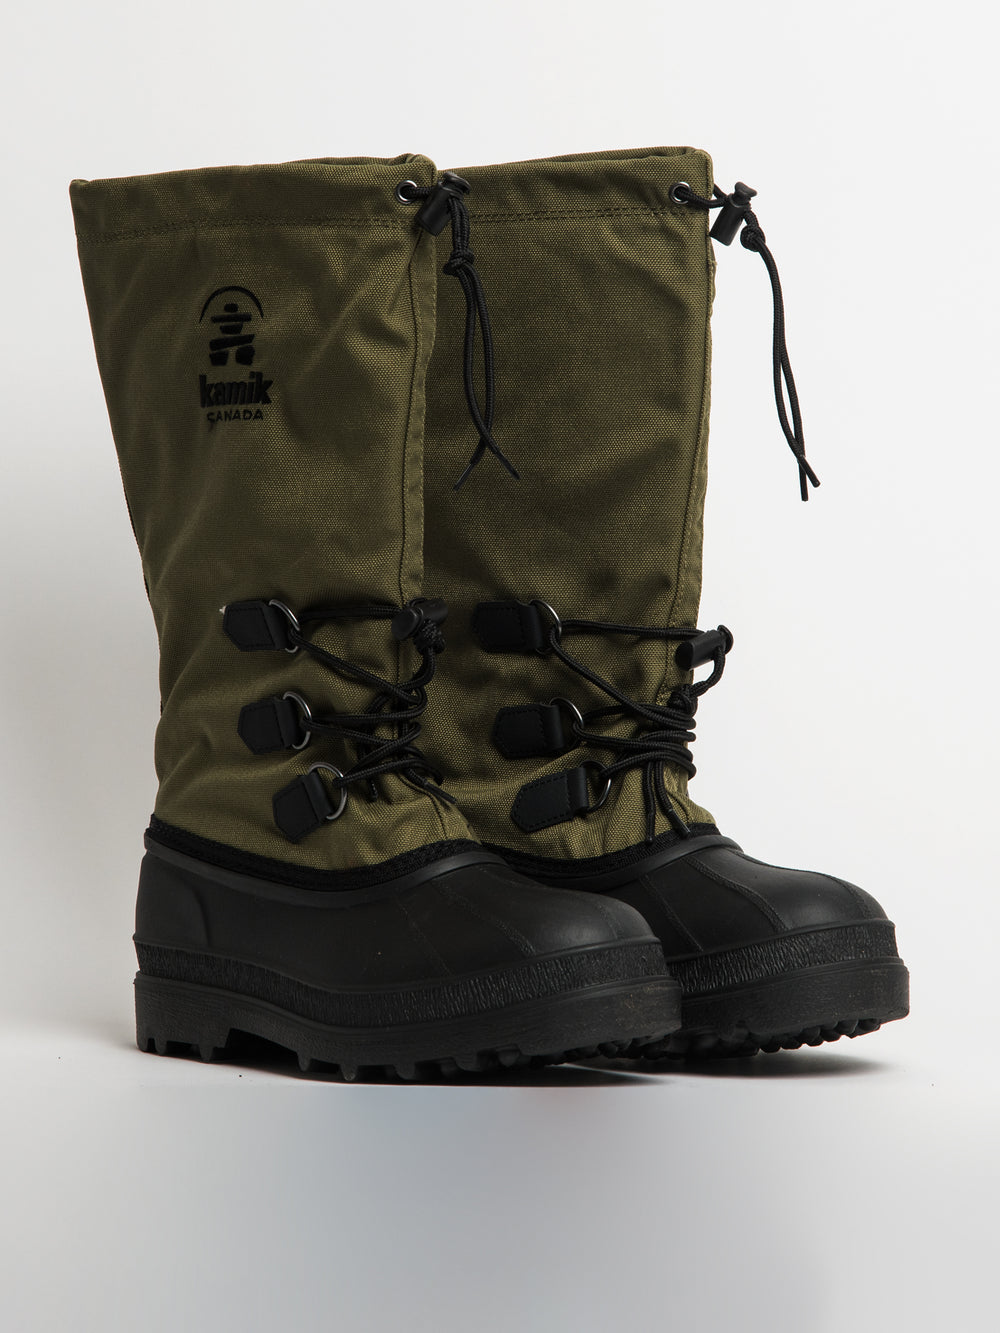 BOTTES CANUCK BOOT